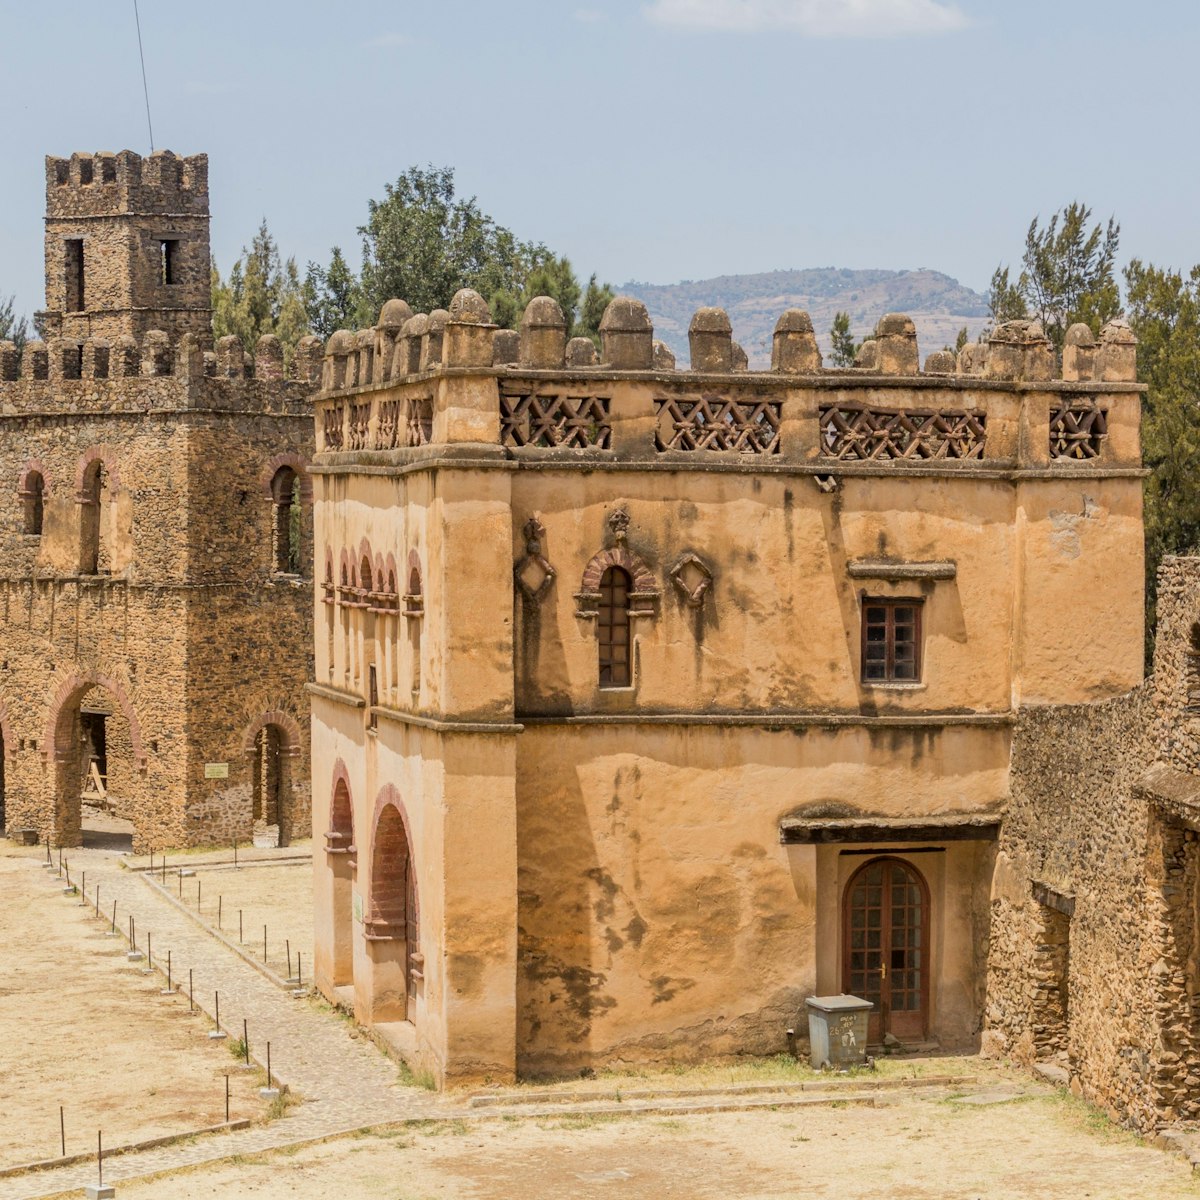 Royal archive and library buildings in the Royal Enclosure in Gondar, Ethiopia
